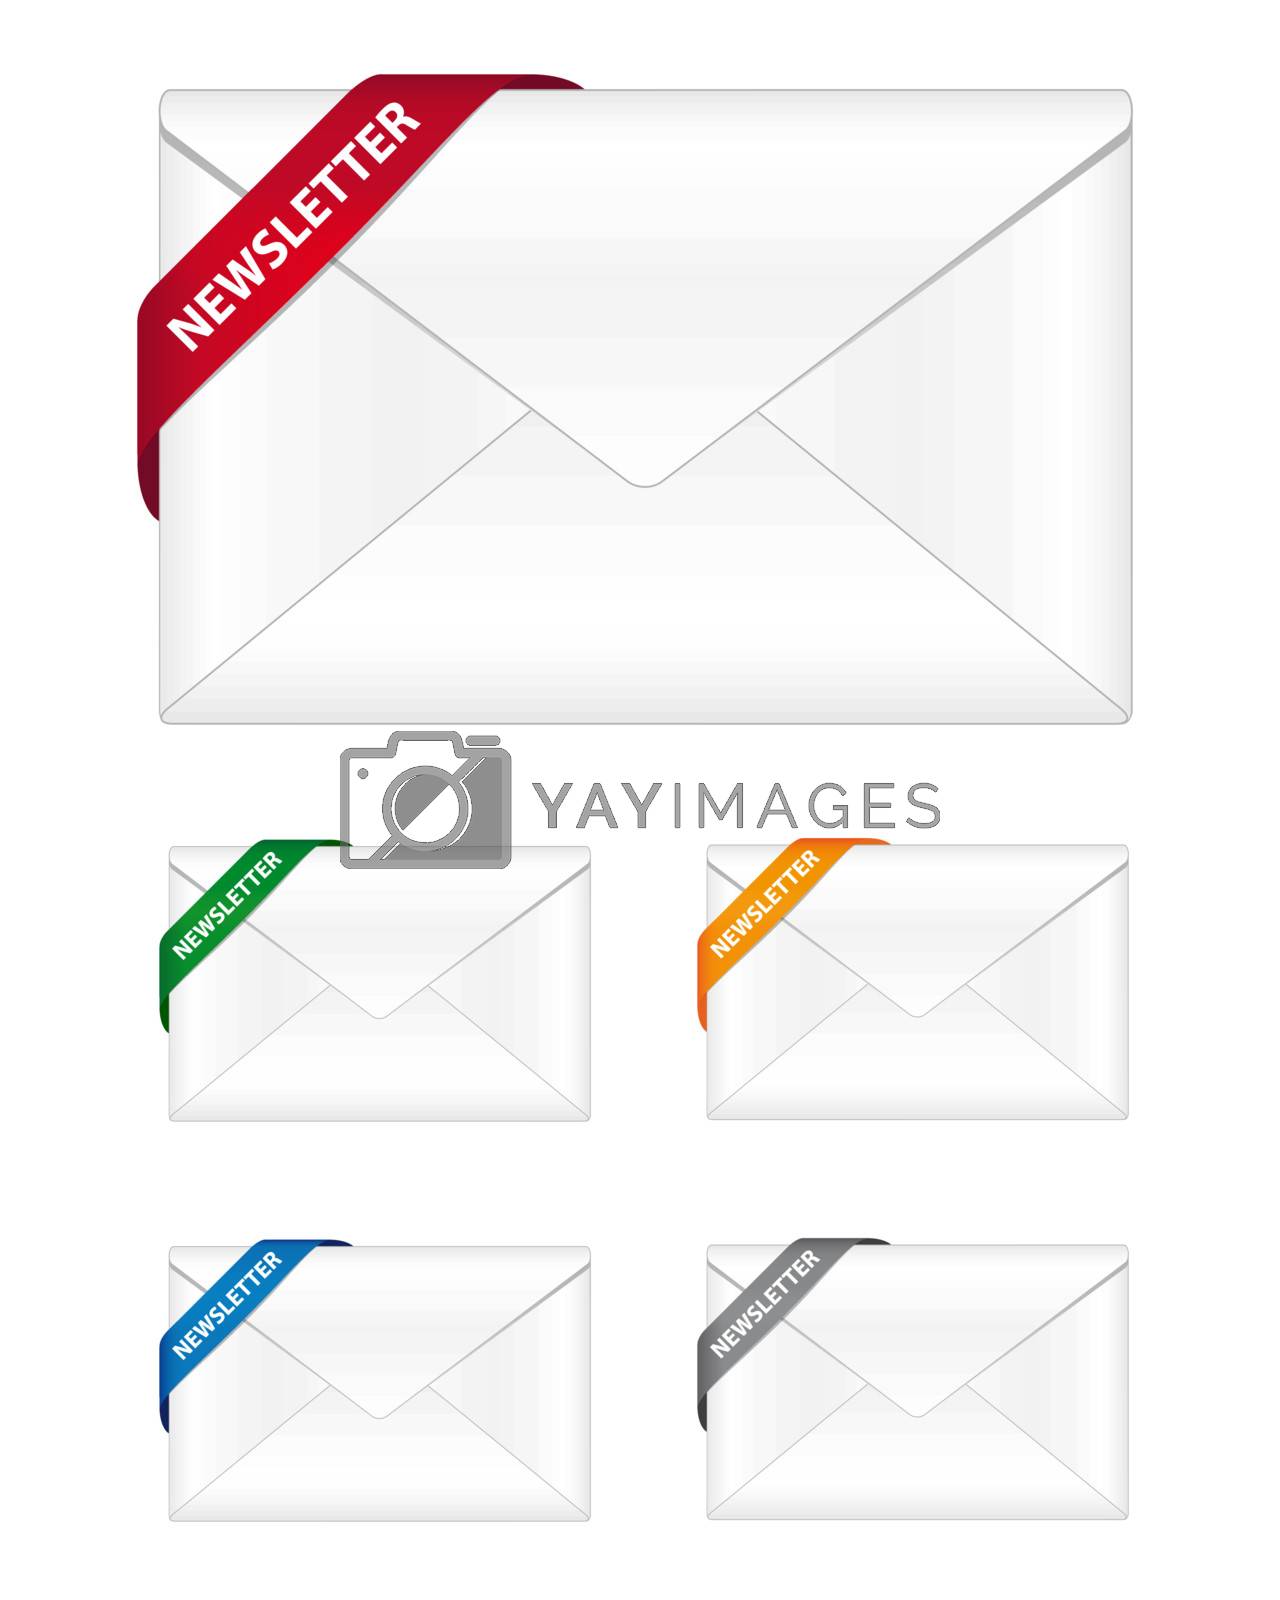 Royalty free image of Newsletter icons by simo988